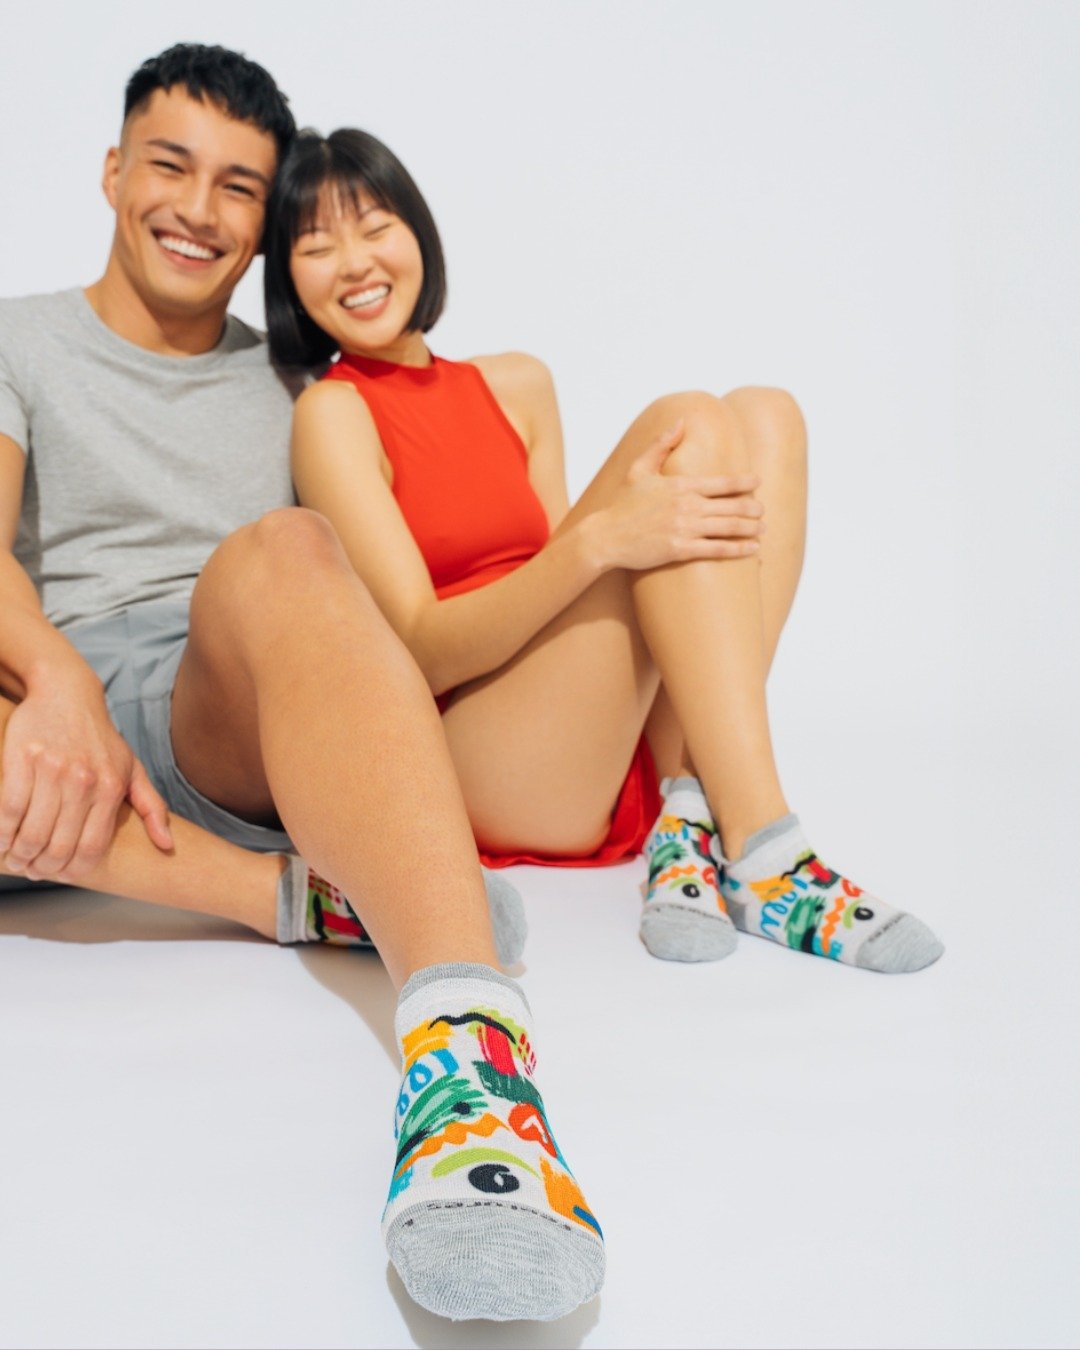 🎉 We are honored to collaborate with Feetures on the &quot;Unity in Stride&quot; sock!

This limited edition style is more than a premium sock&mdash;a portion of the proceeds go directly towards the RIDC&rsquo;s mission of championing diversity, equ